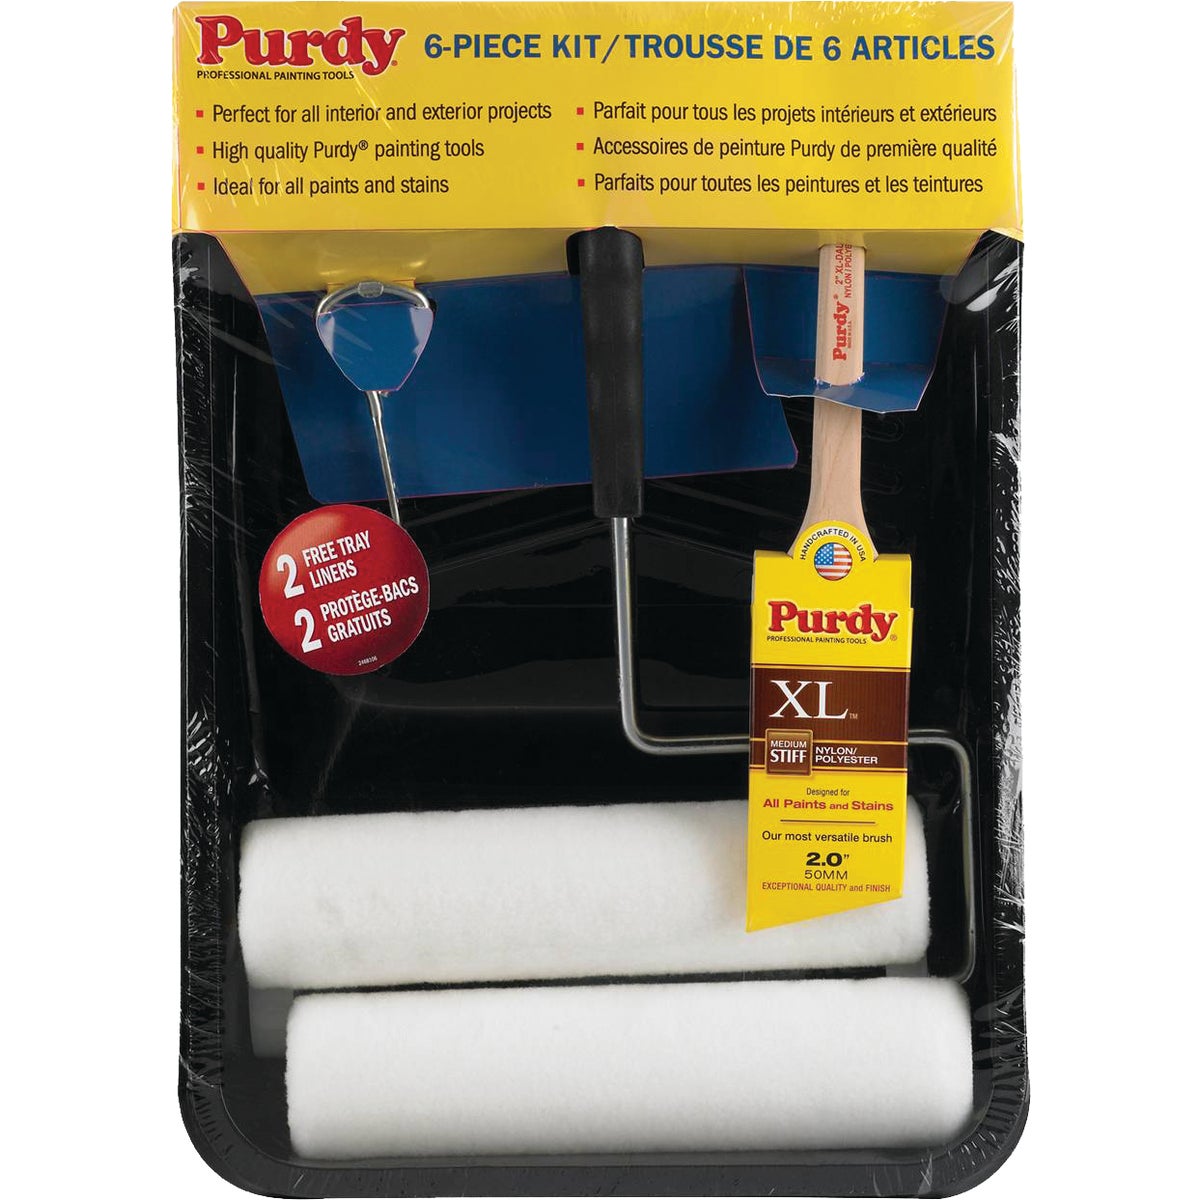 Item 778169, High quality Purdy painting tools are perfect for all interior and exterior